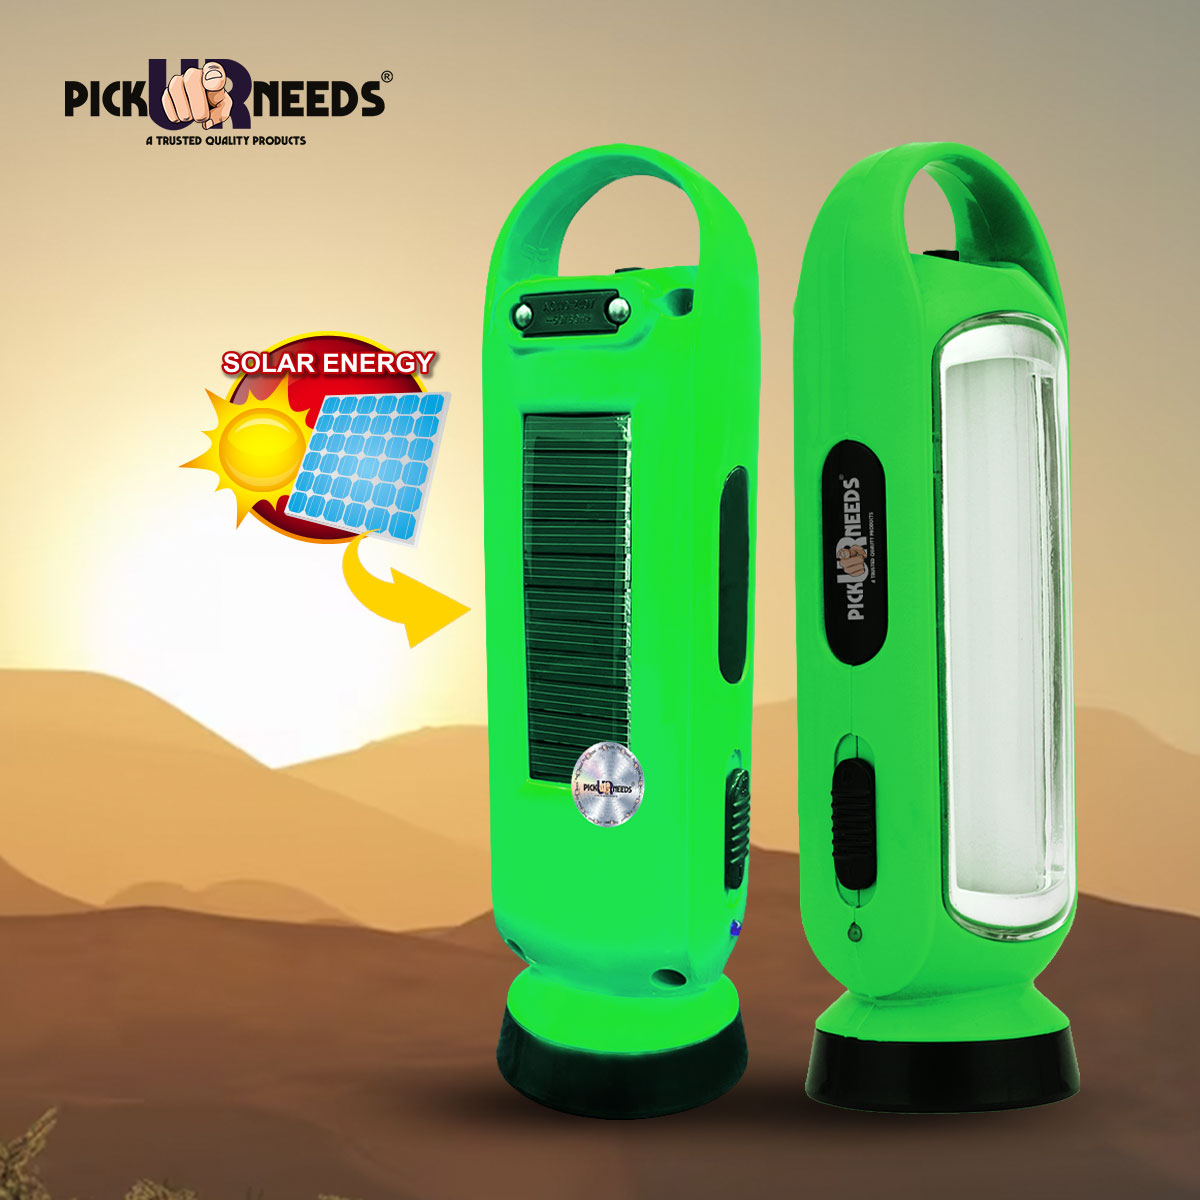 Pick Ur Needs 3 in 1 LED Solar Rechargeable Emergency Lantern Lamp Torch Light 4 hrs Torch Light